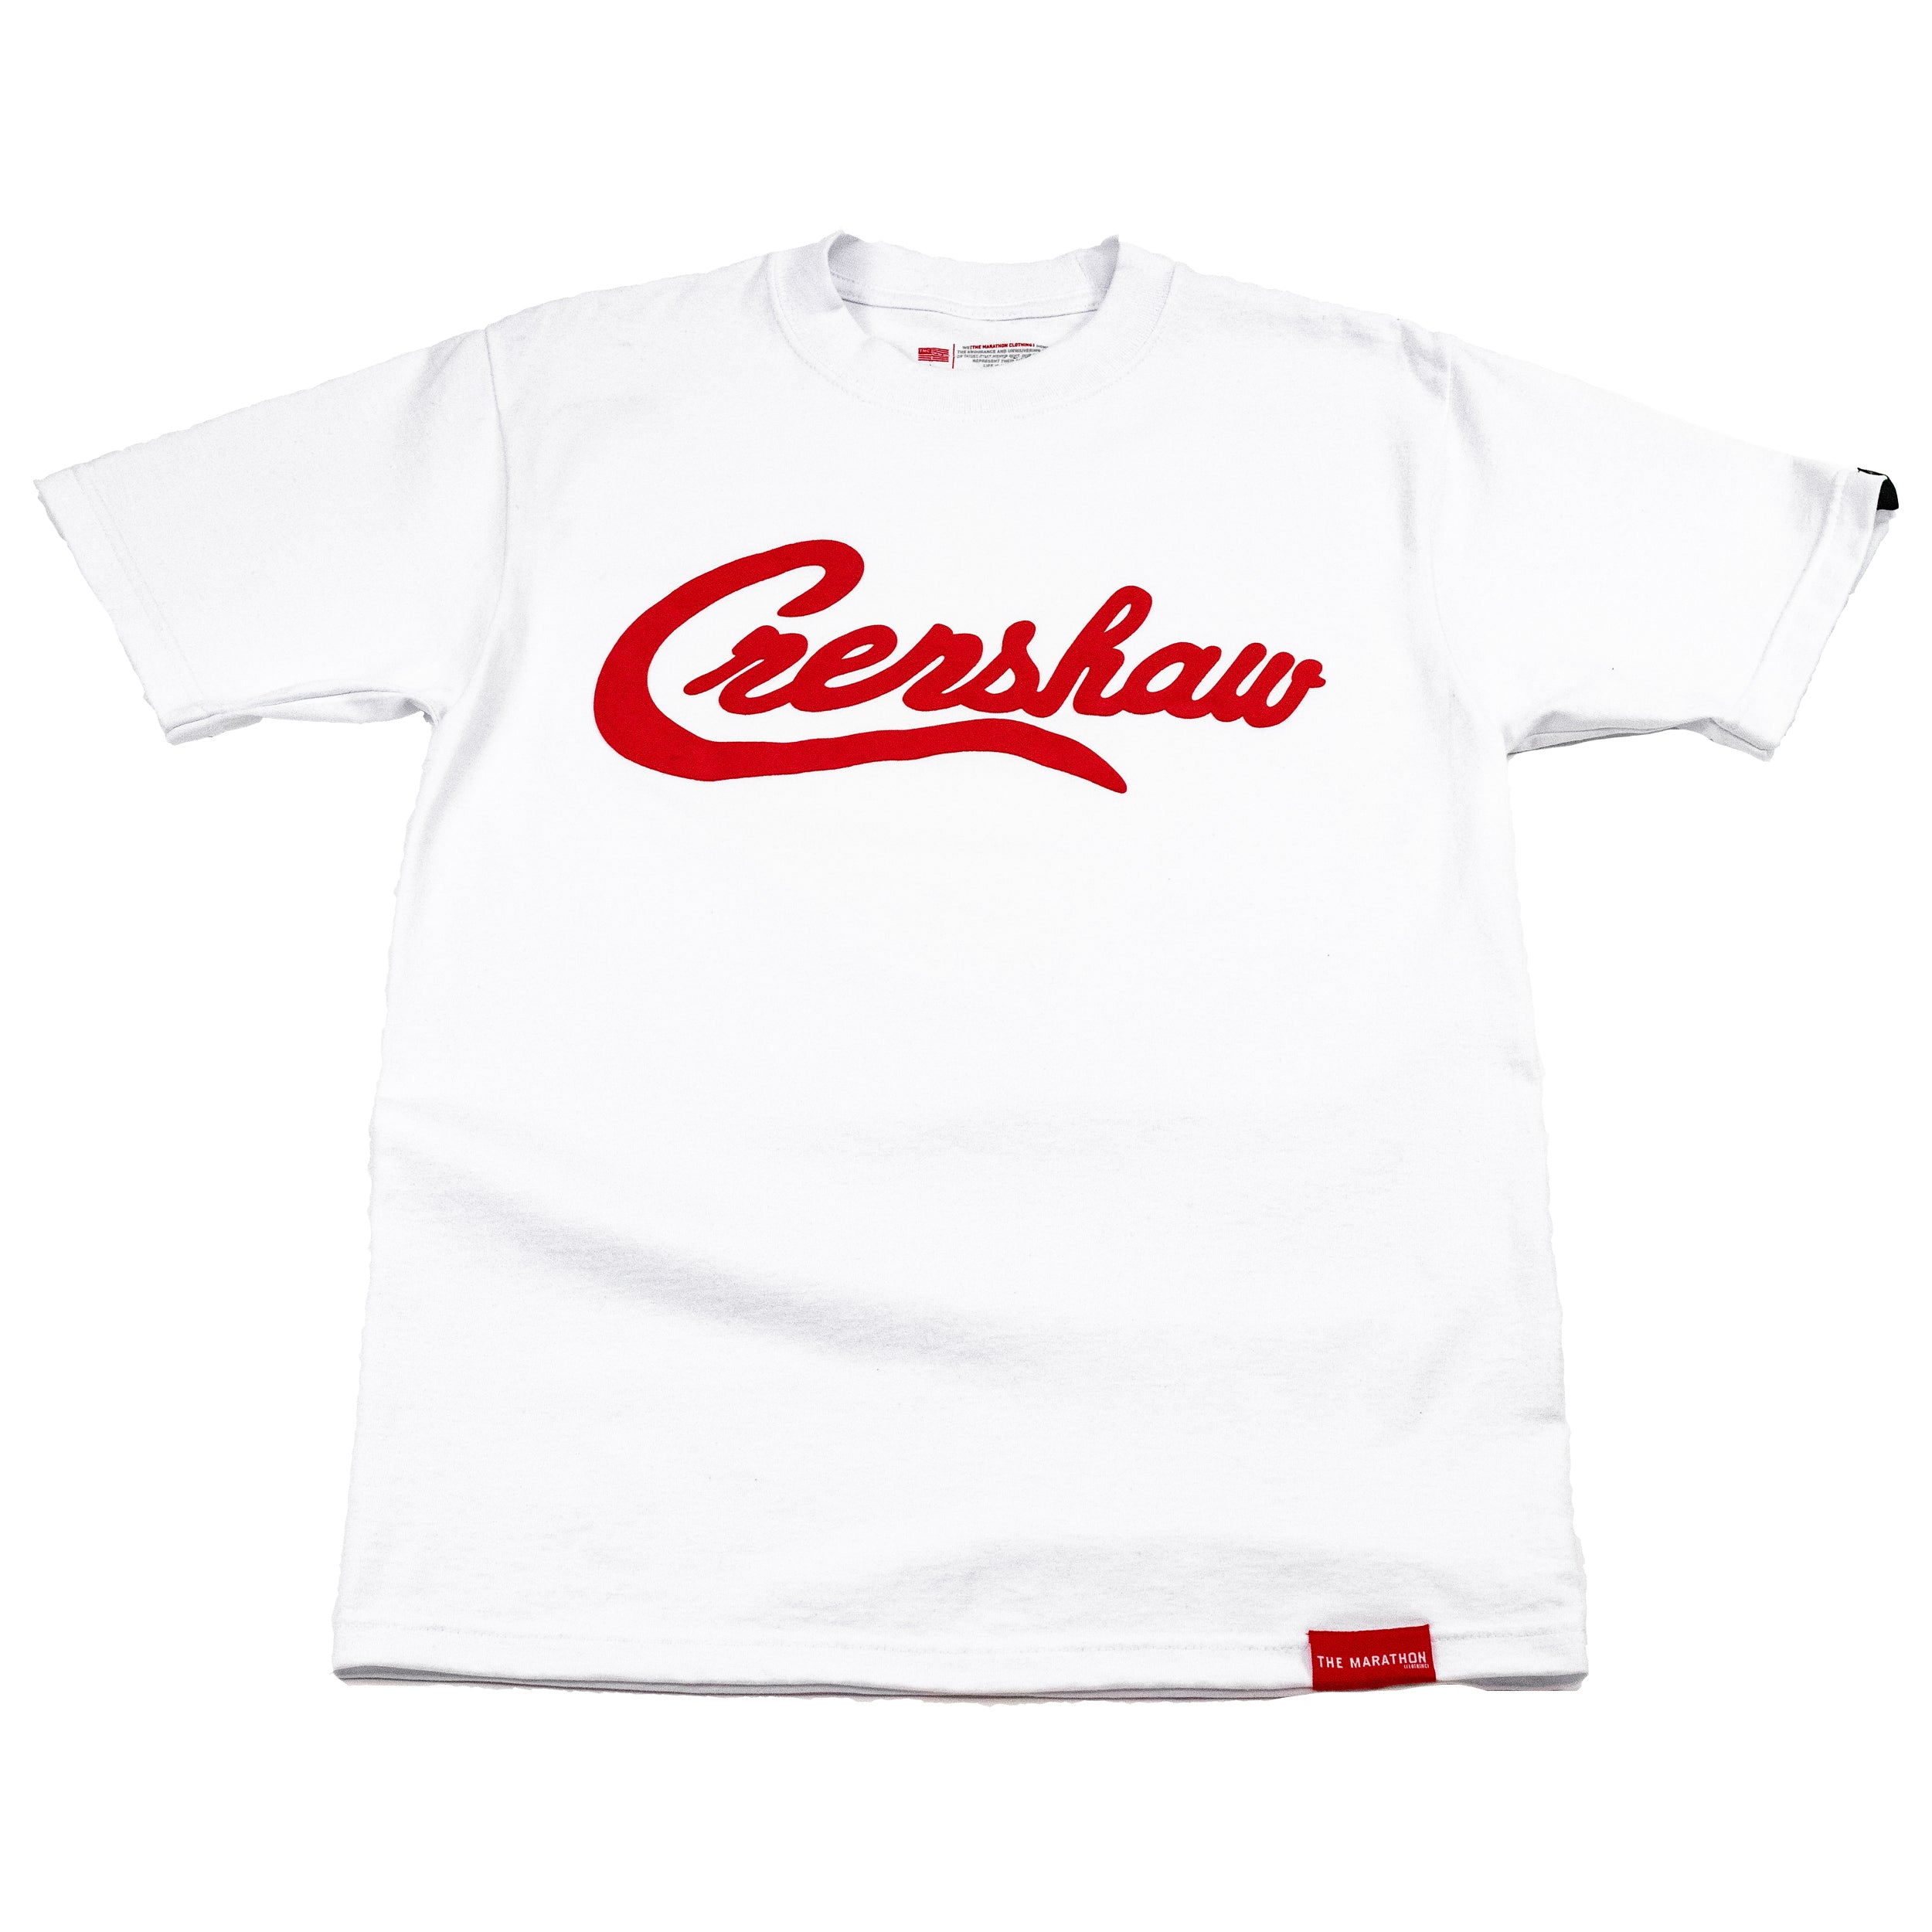 Limited Edition Crenshaw T-Shirt White/Red – Clothing